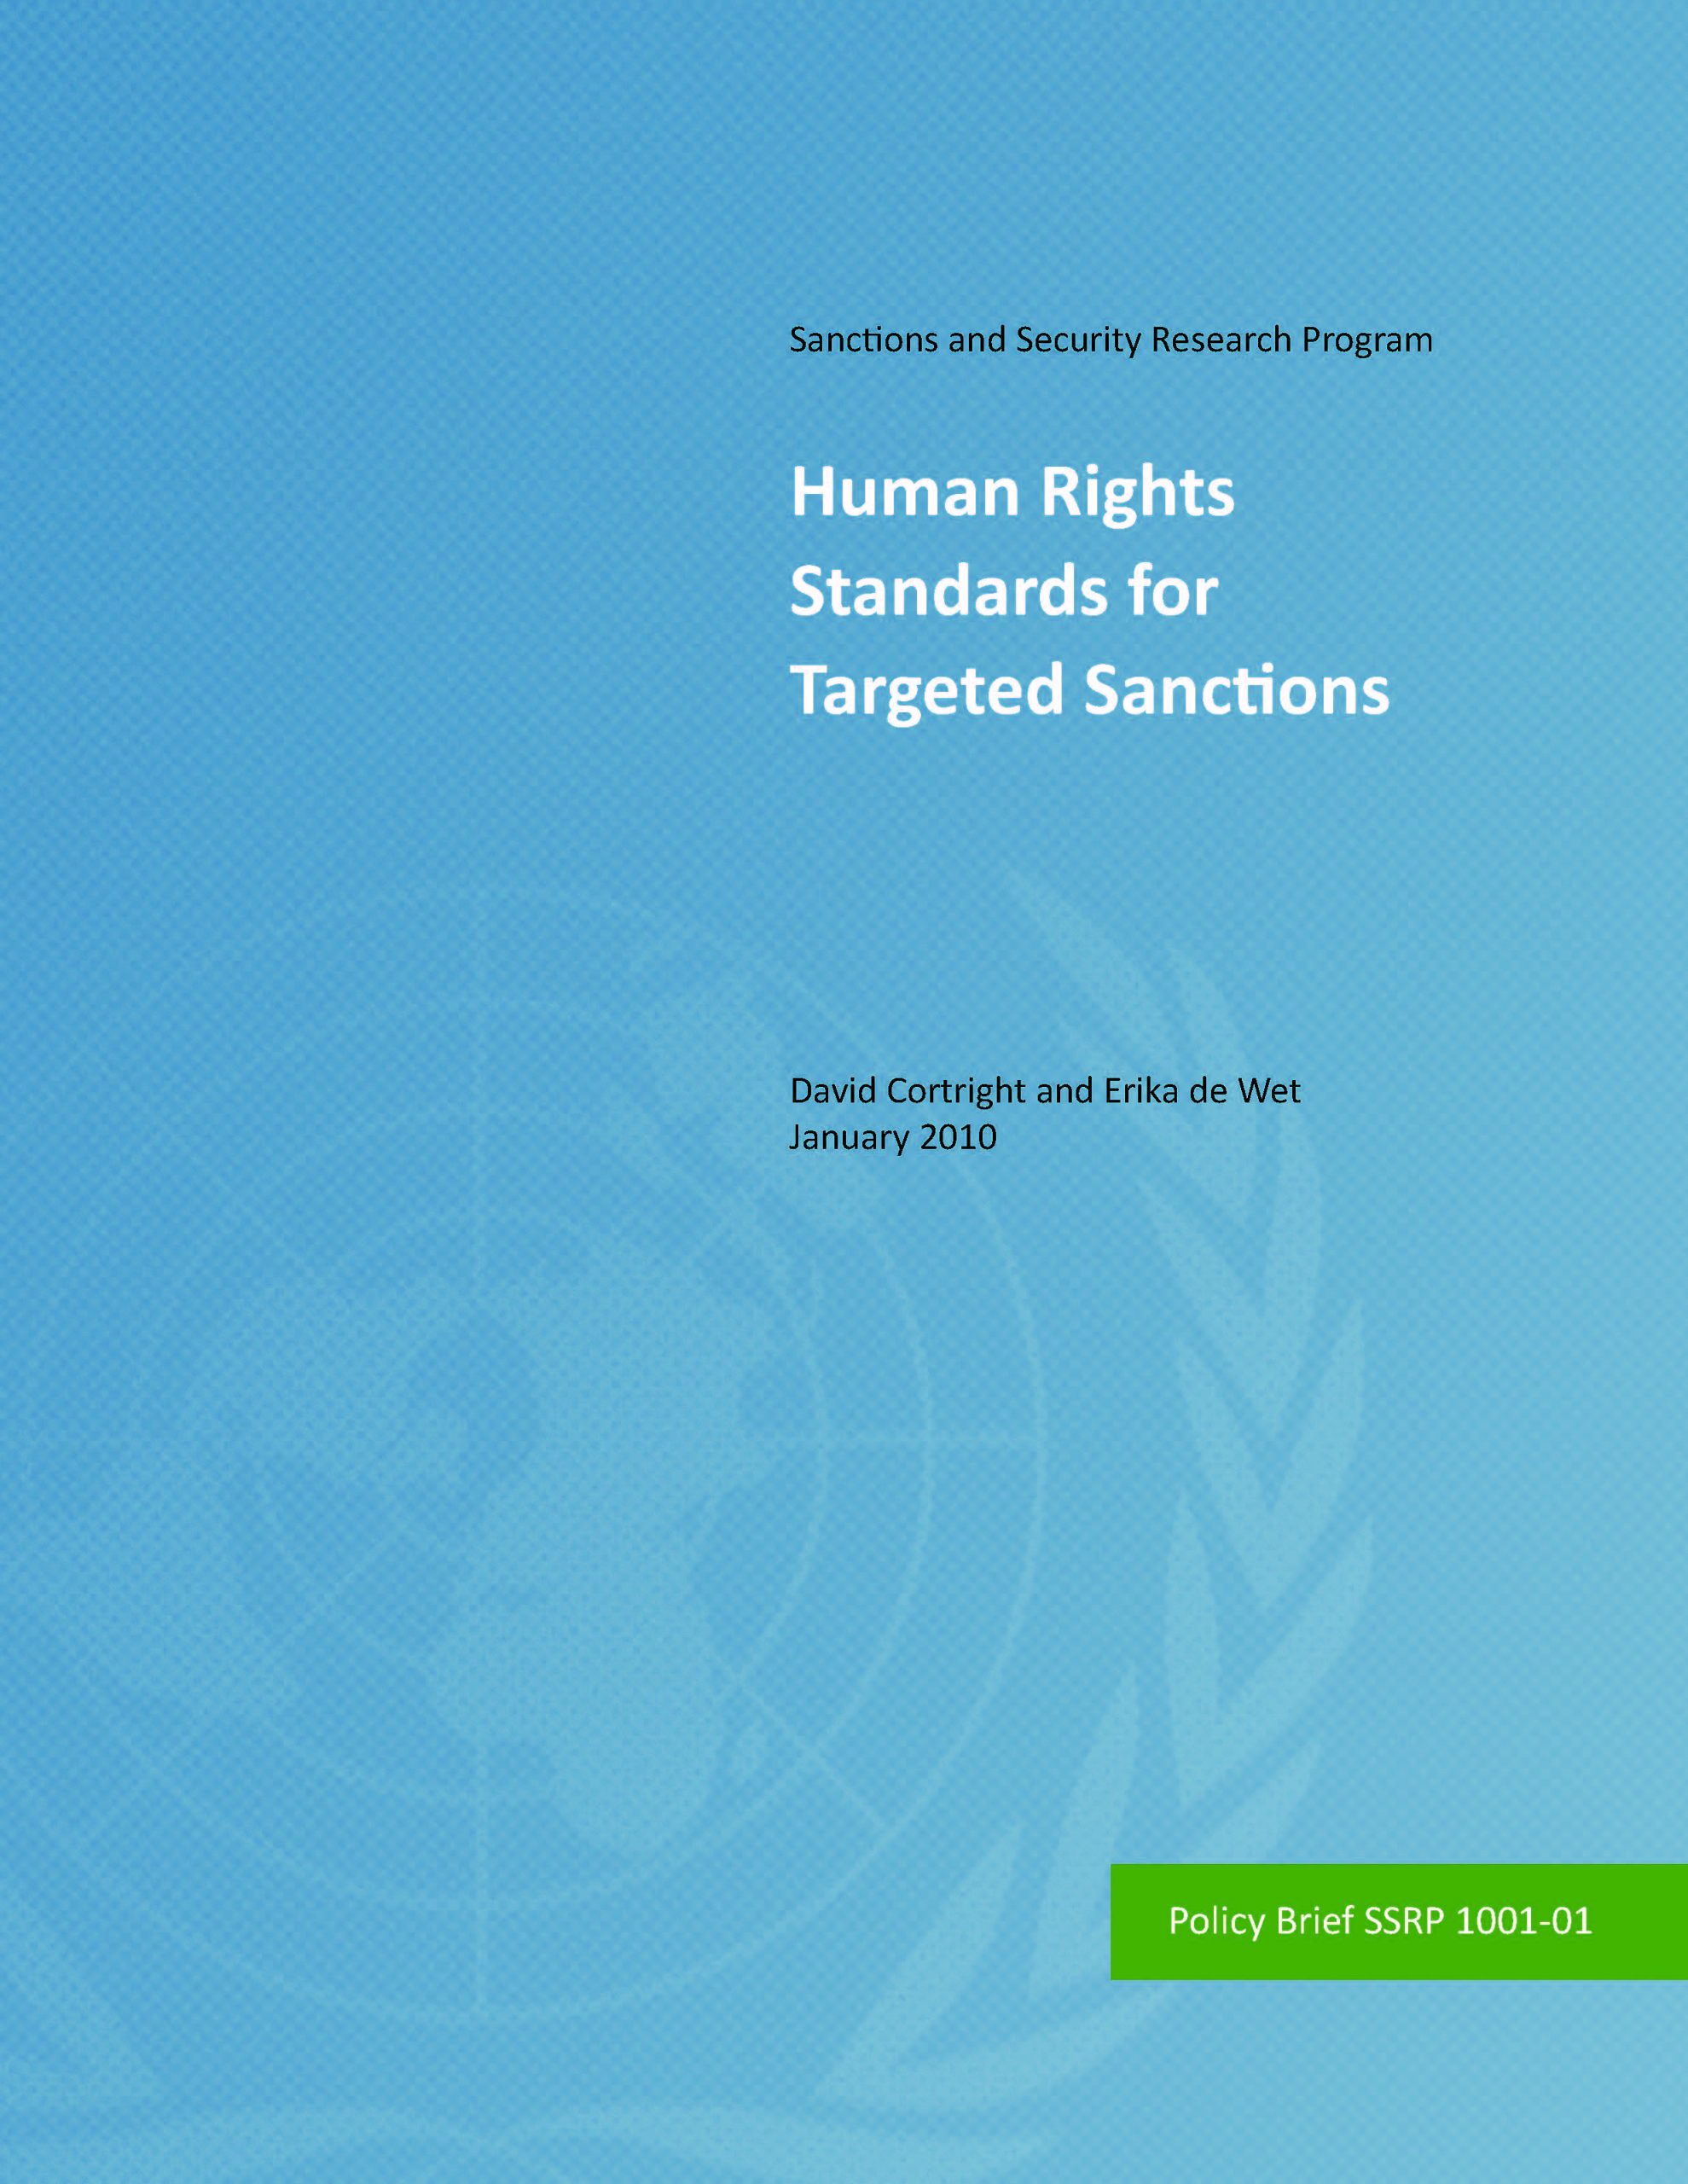 Human Rights Standards for Targeted Sanctions